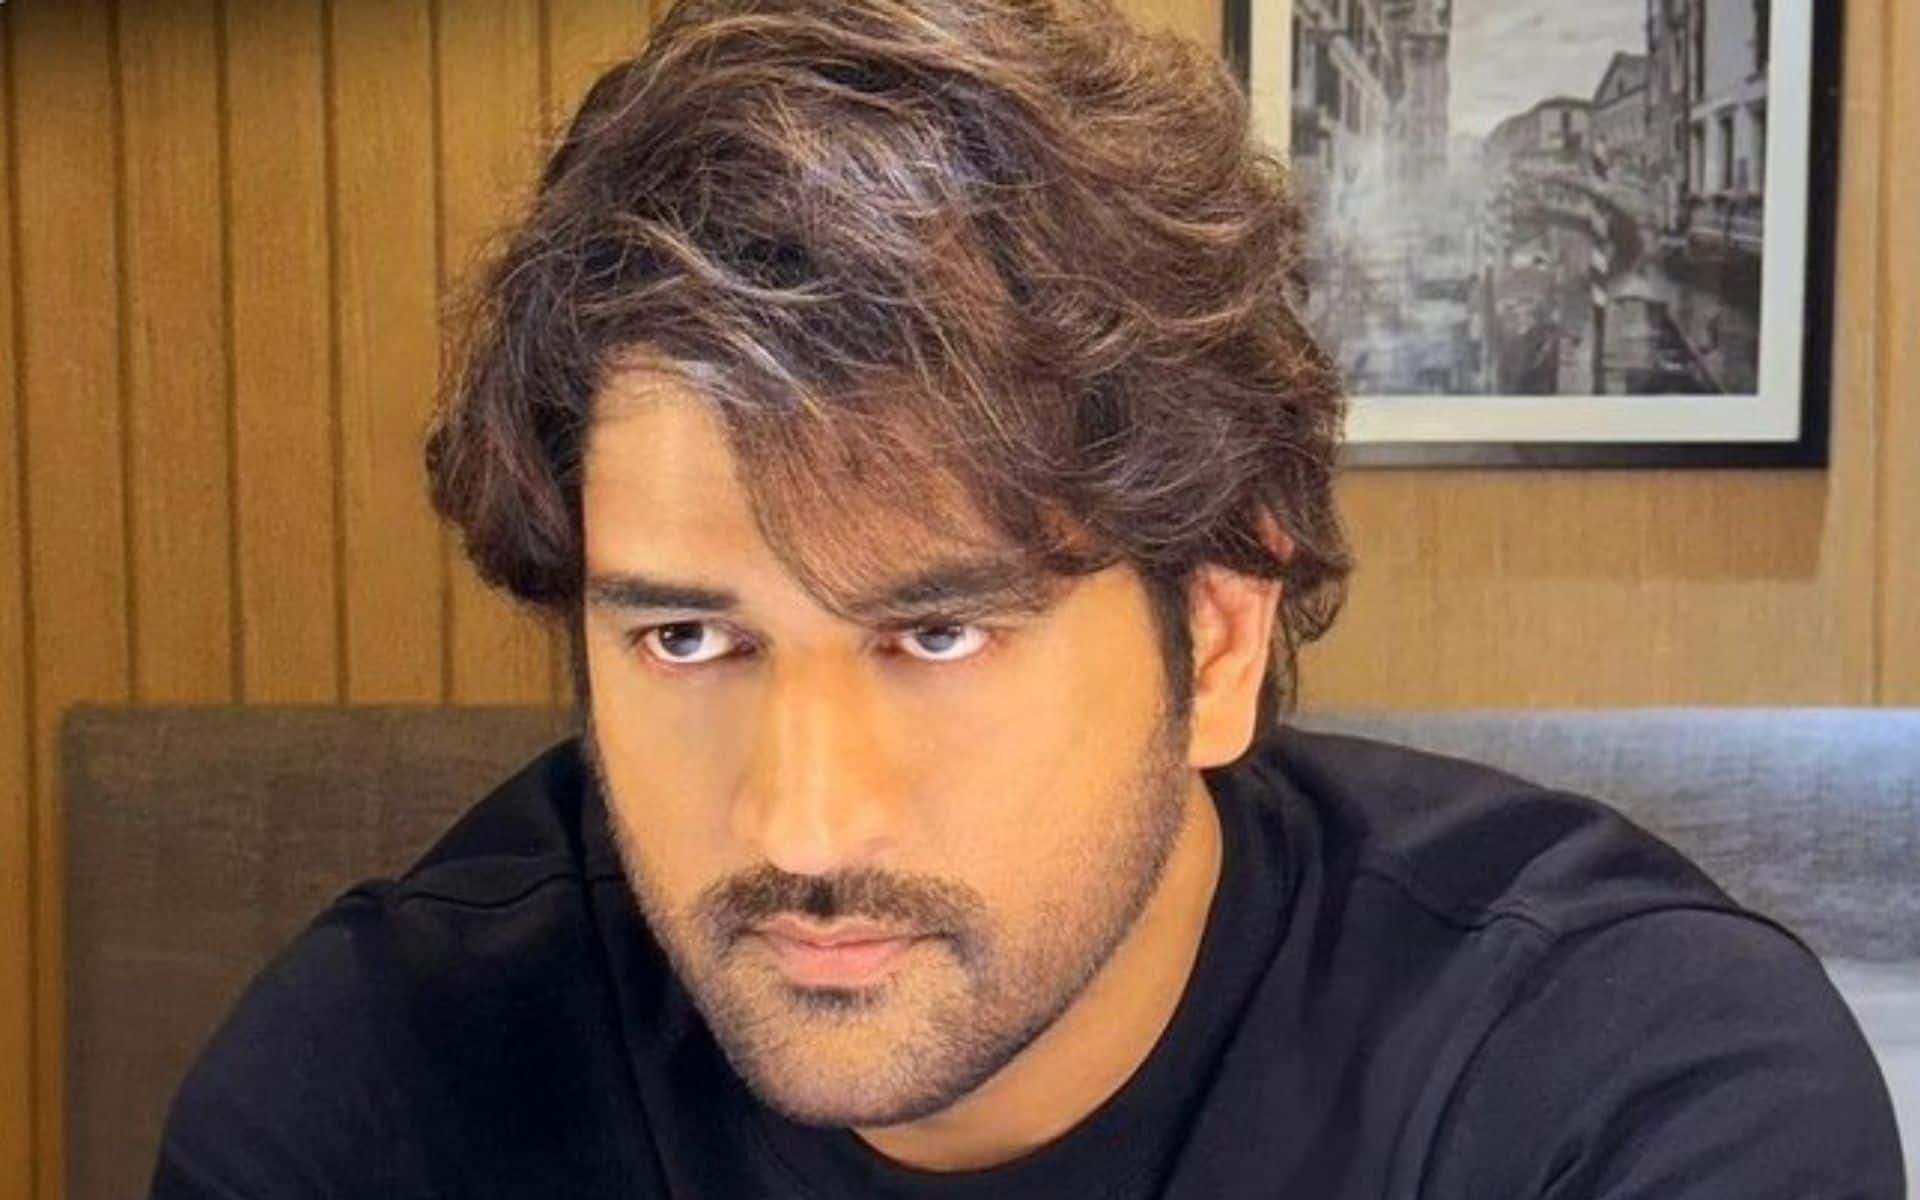 MS Dhoni unveils new hairstyle [Instagram]